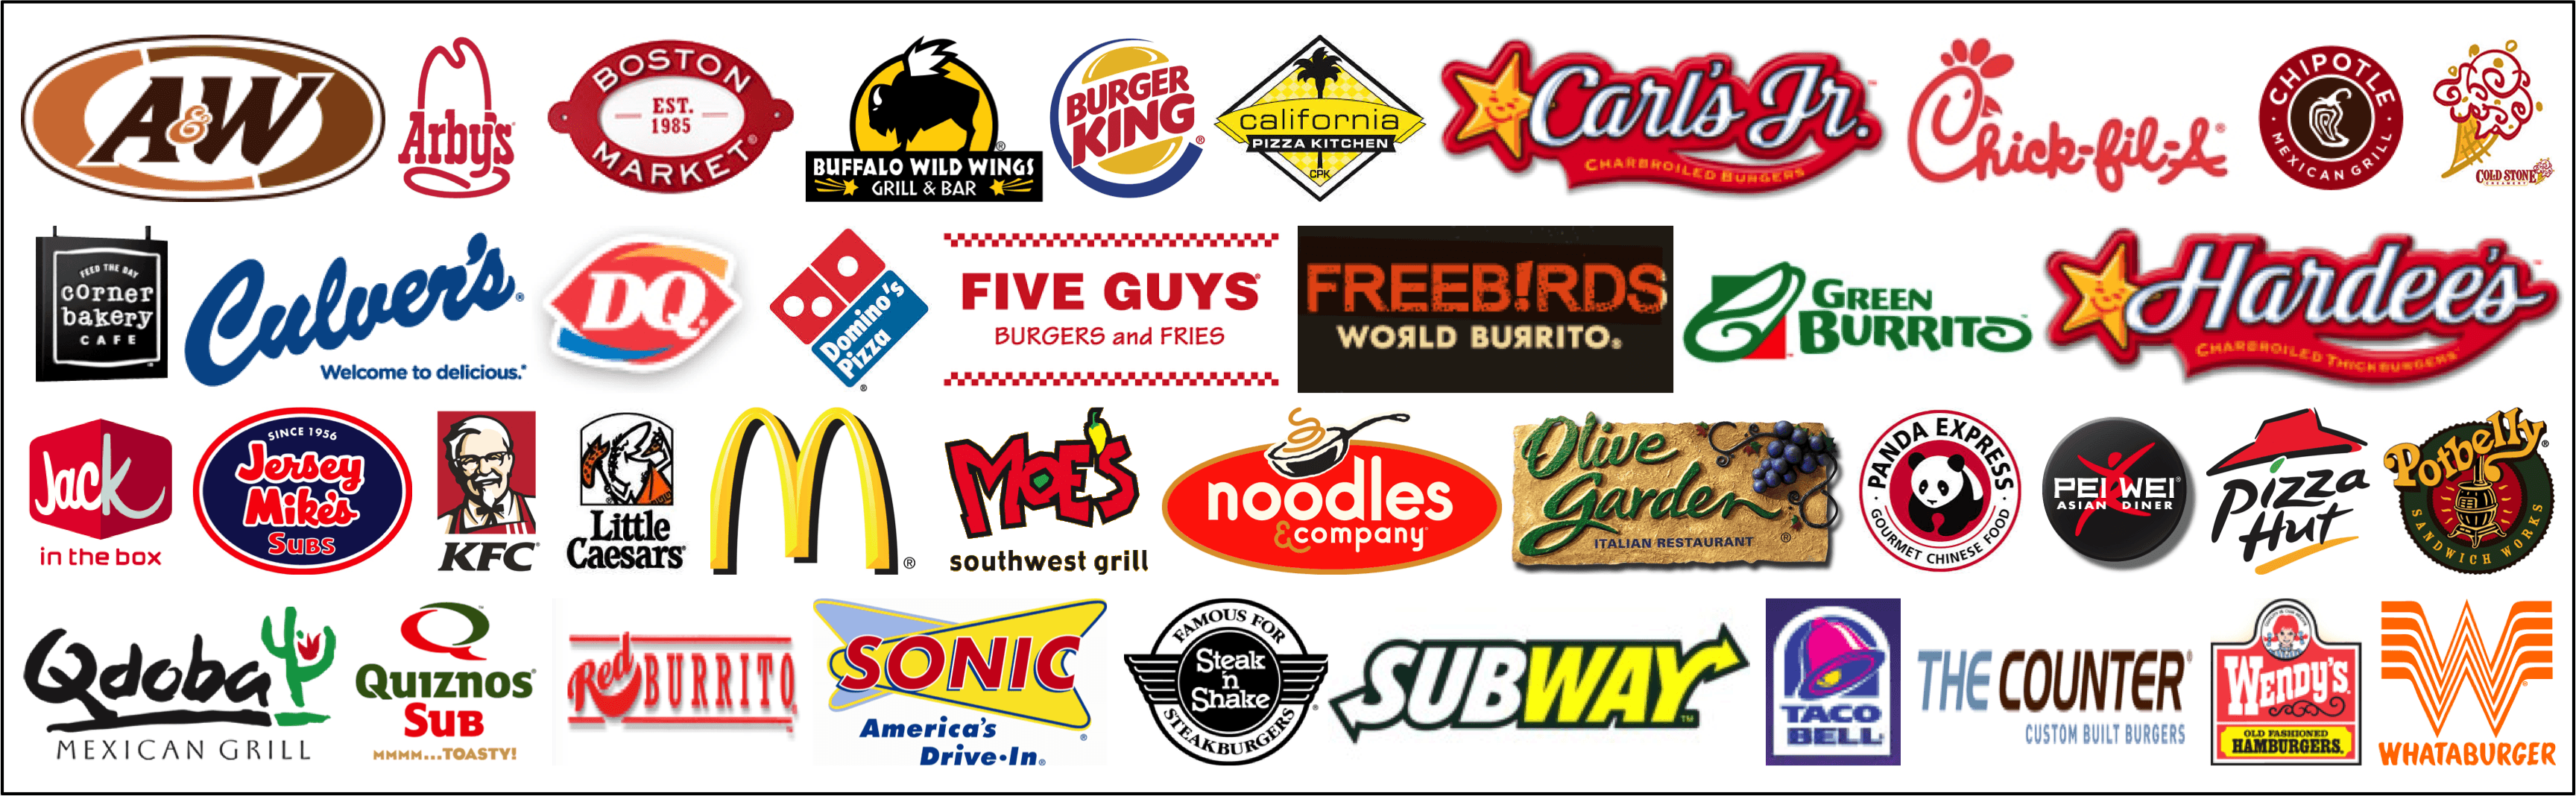 Popular Food Chains Logo - American Fast Food Restaurants - How many have you tried?